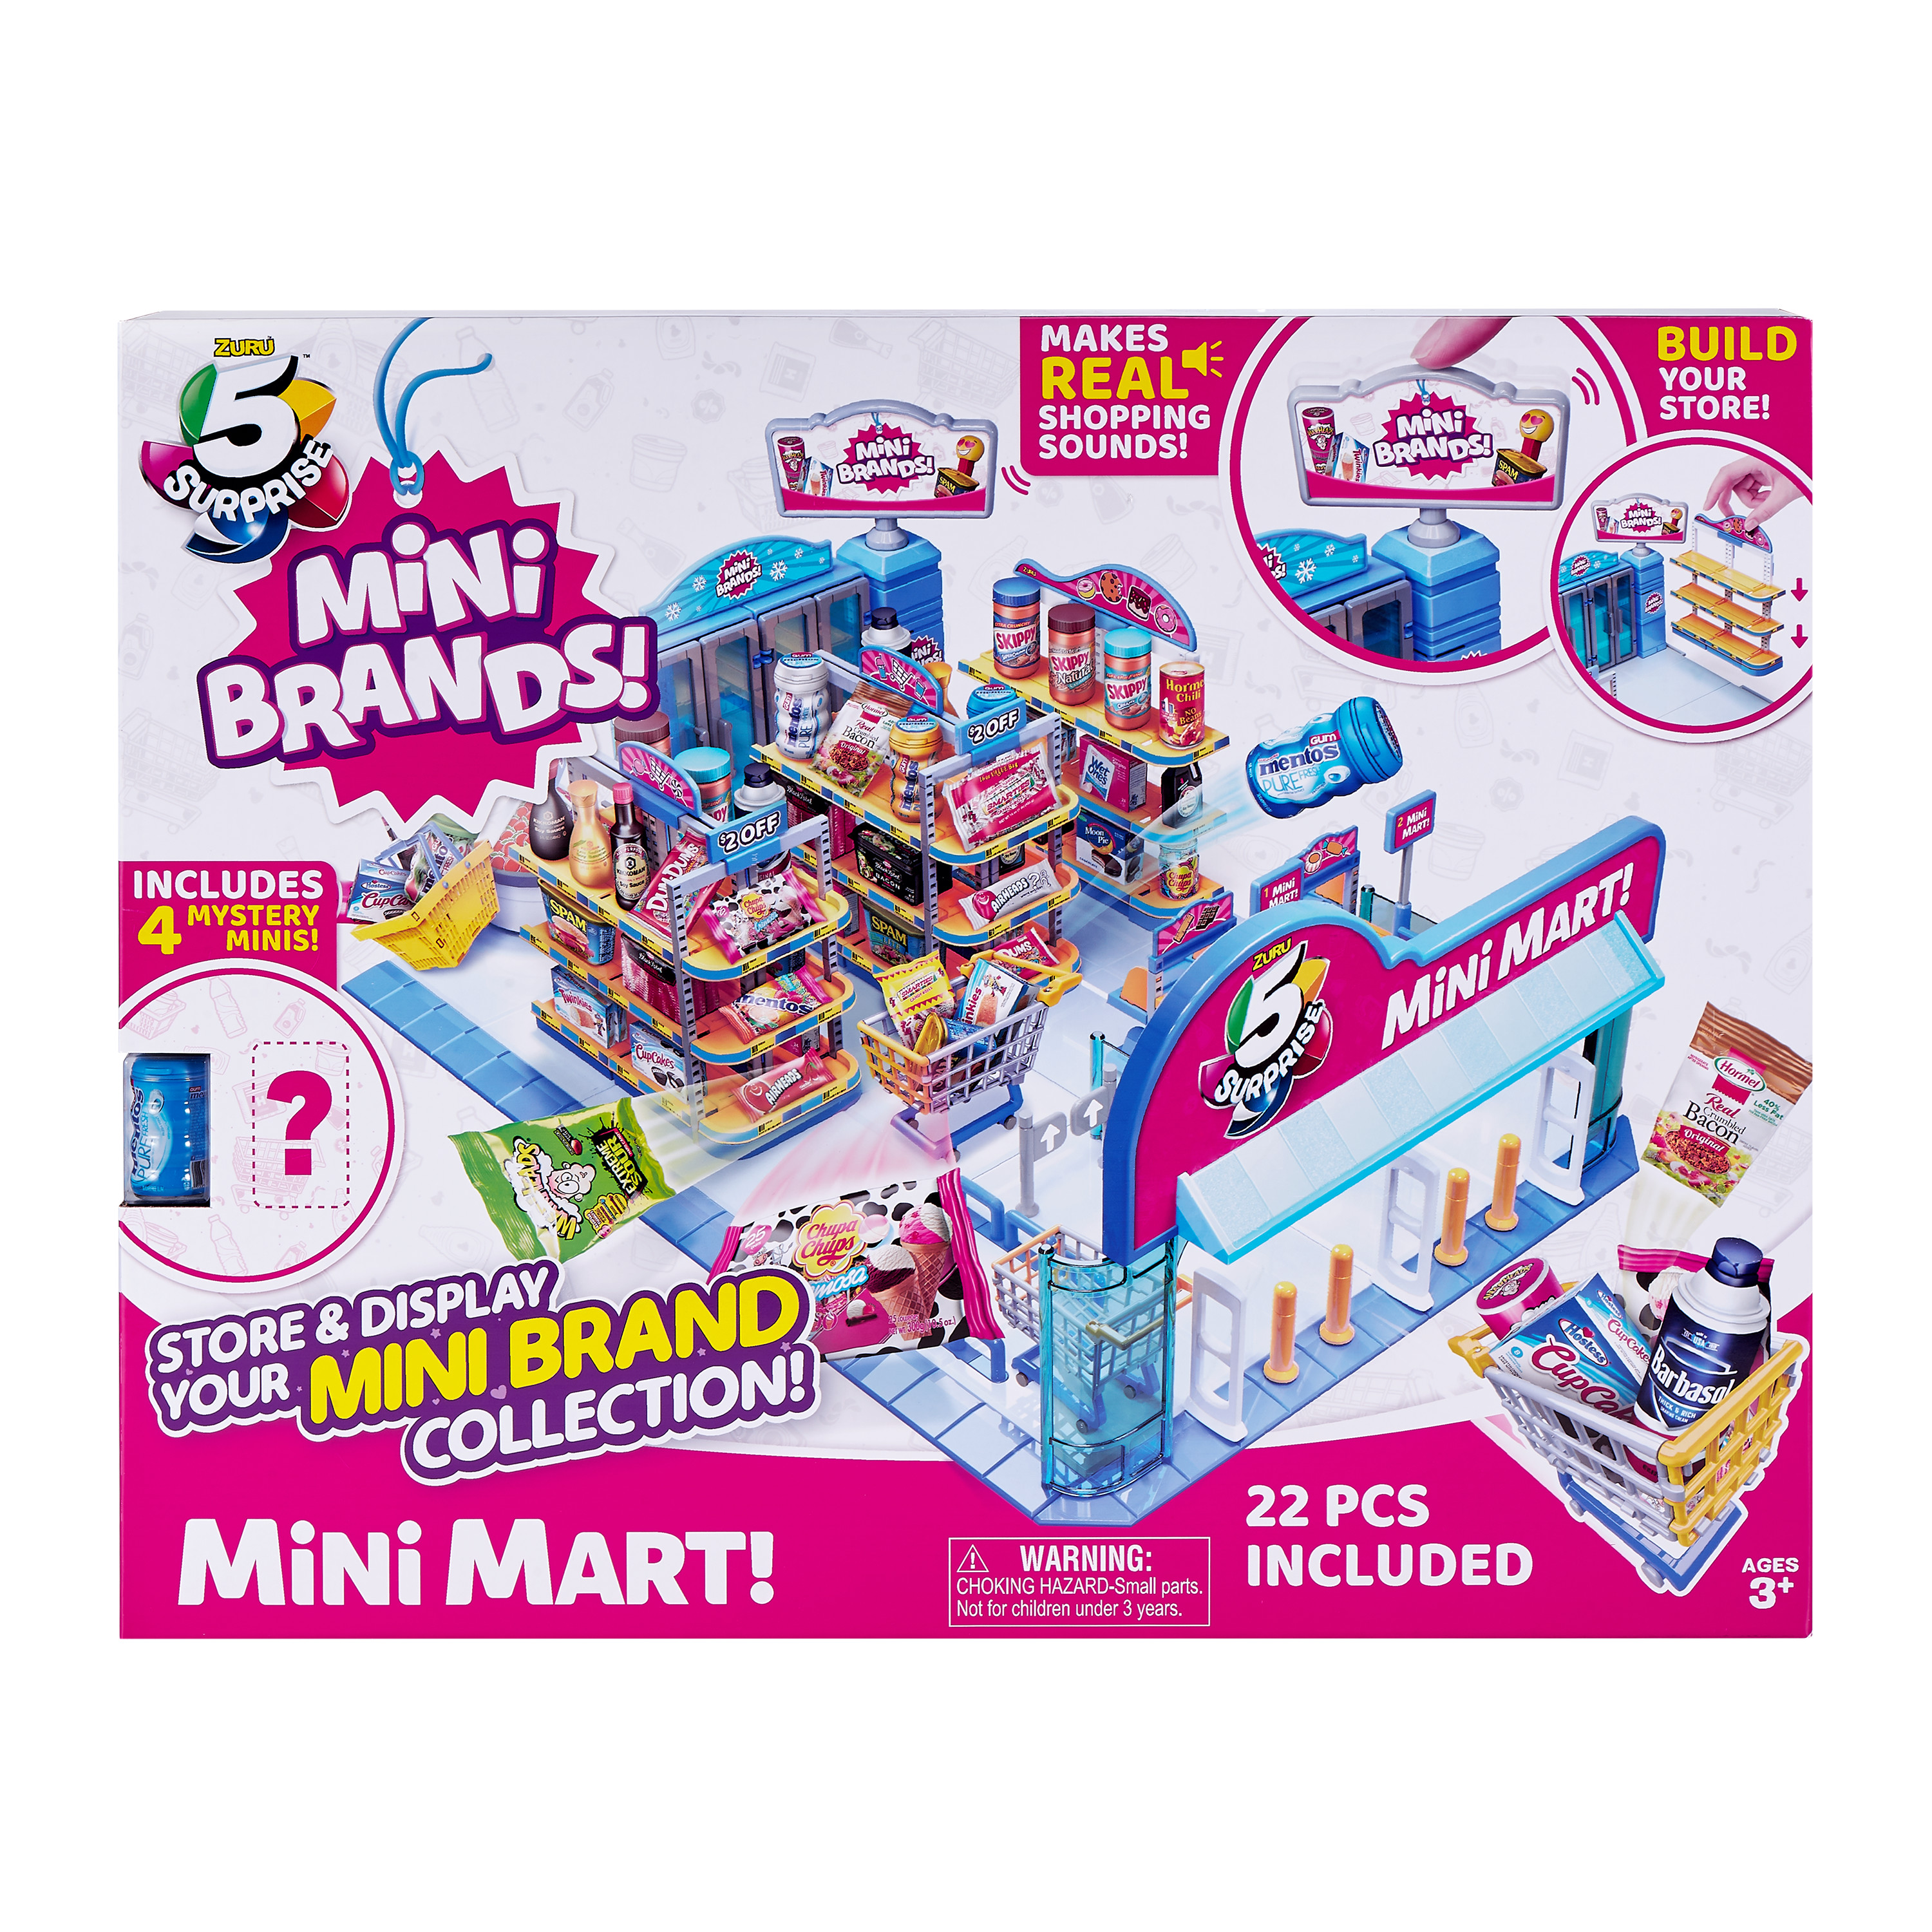 5 Surprise Mini Brands Series 2 Electronic Mini Mart with 4 Mystery Mini Brands Playset by ZURU - image 3 of 11